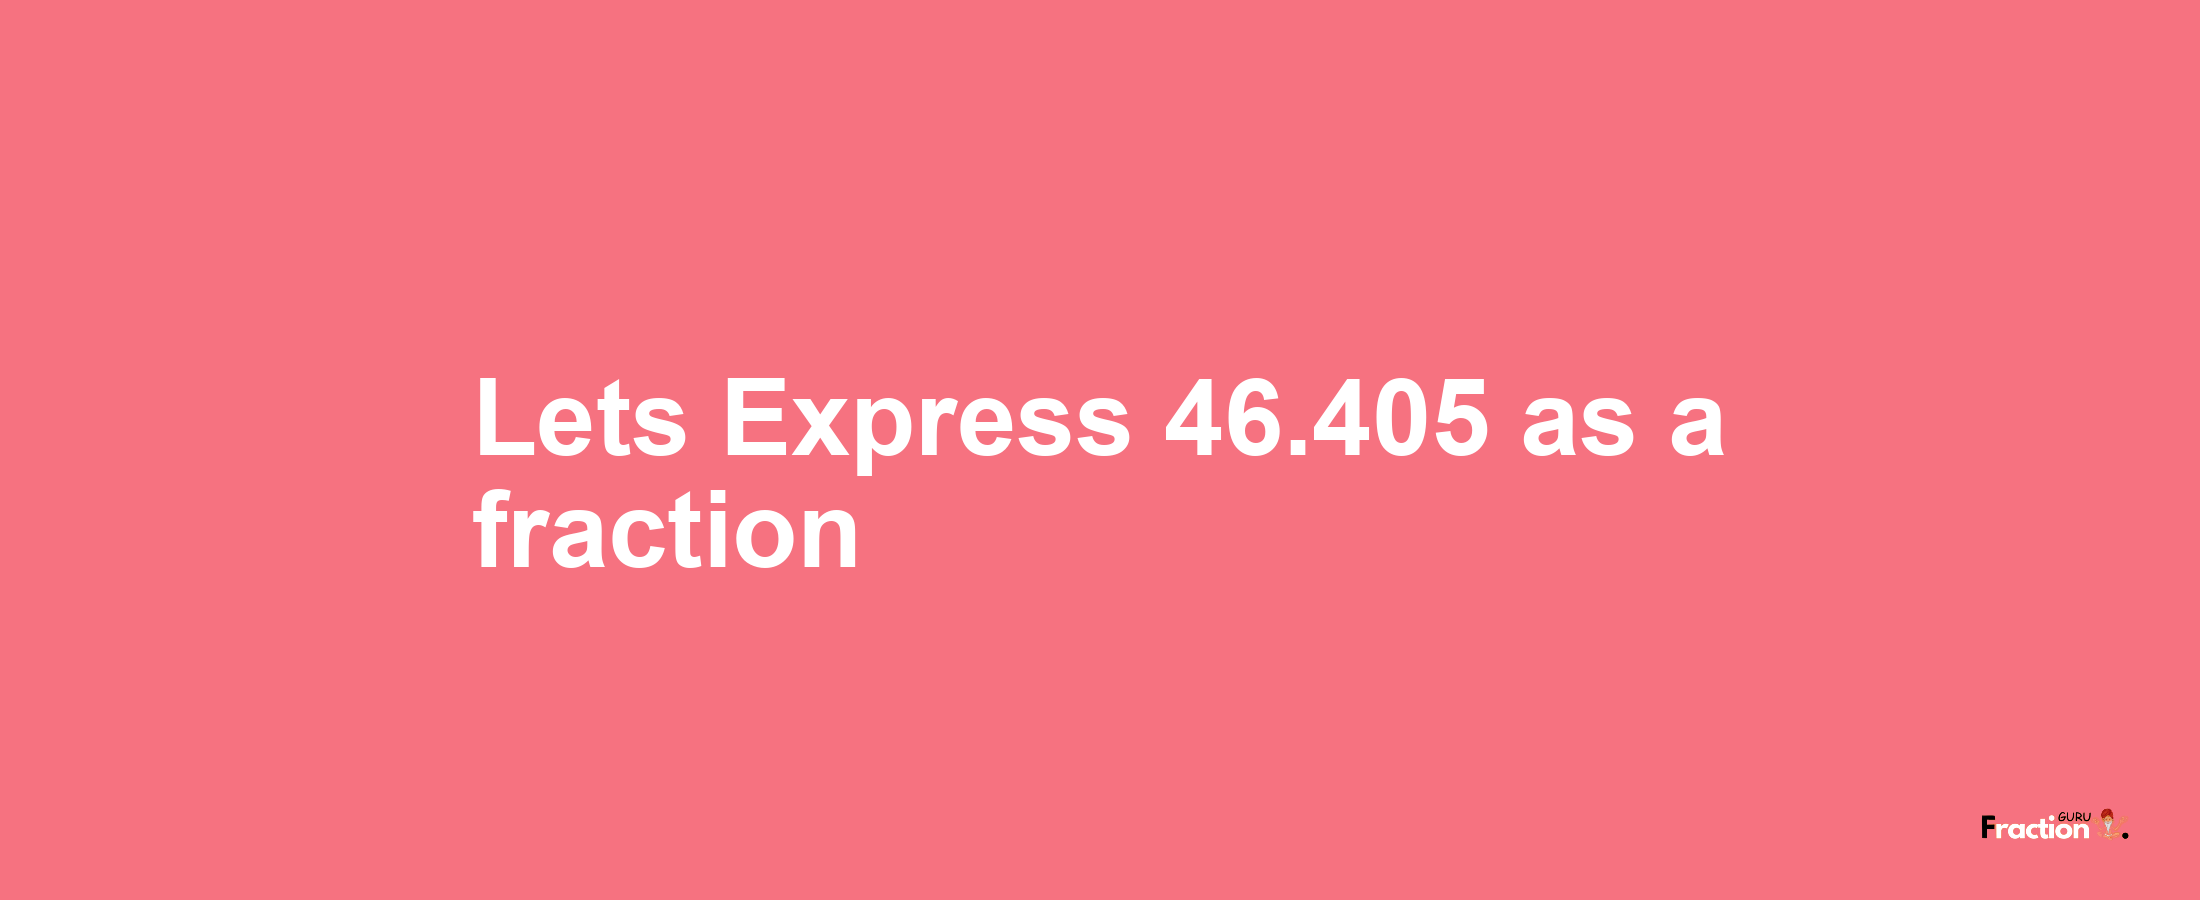 Lets Express 46.405 as afraction